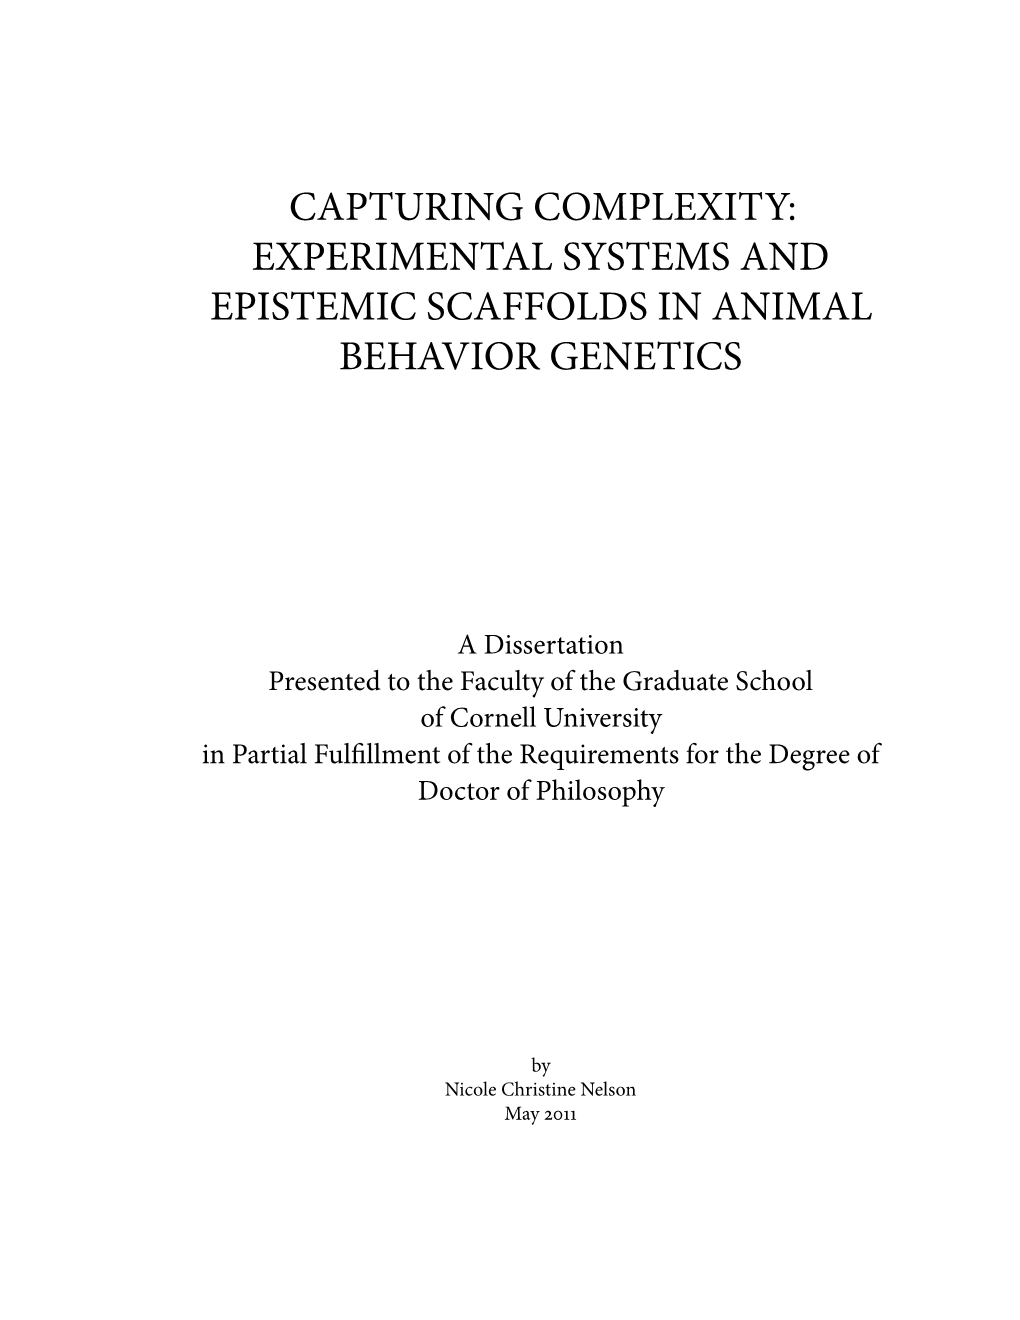 Experimental Systems and Epistemic Scaffolds in Animal Behavior Genetics